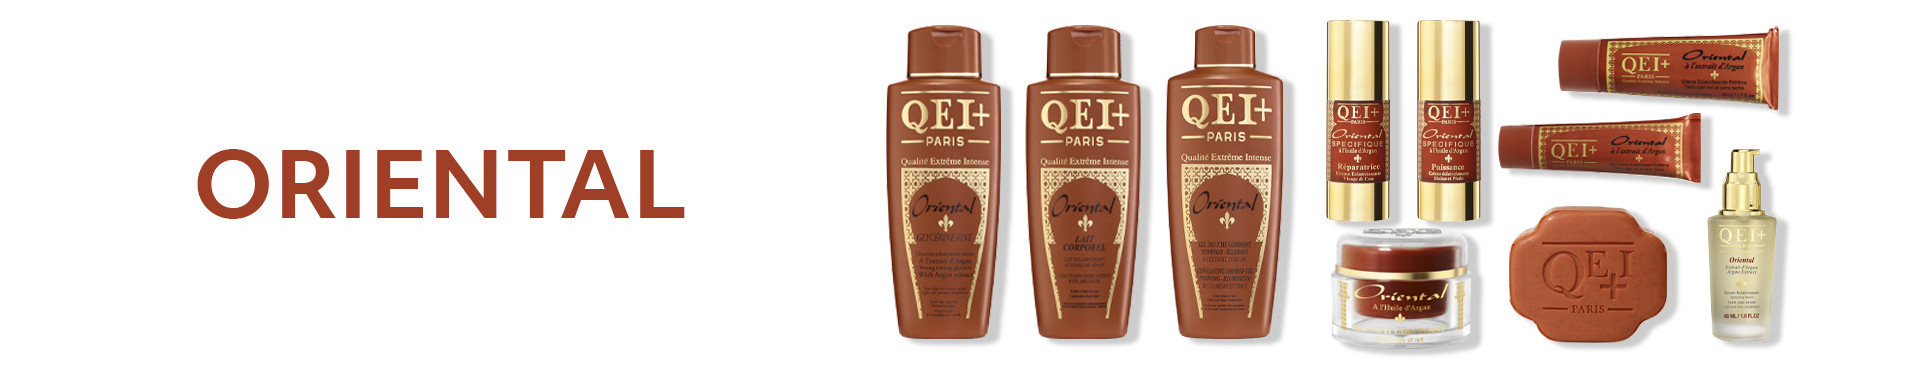  All products with Argan Oil offered by the range of QEI + 